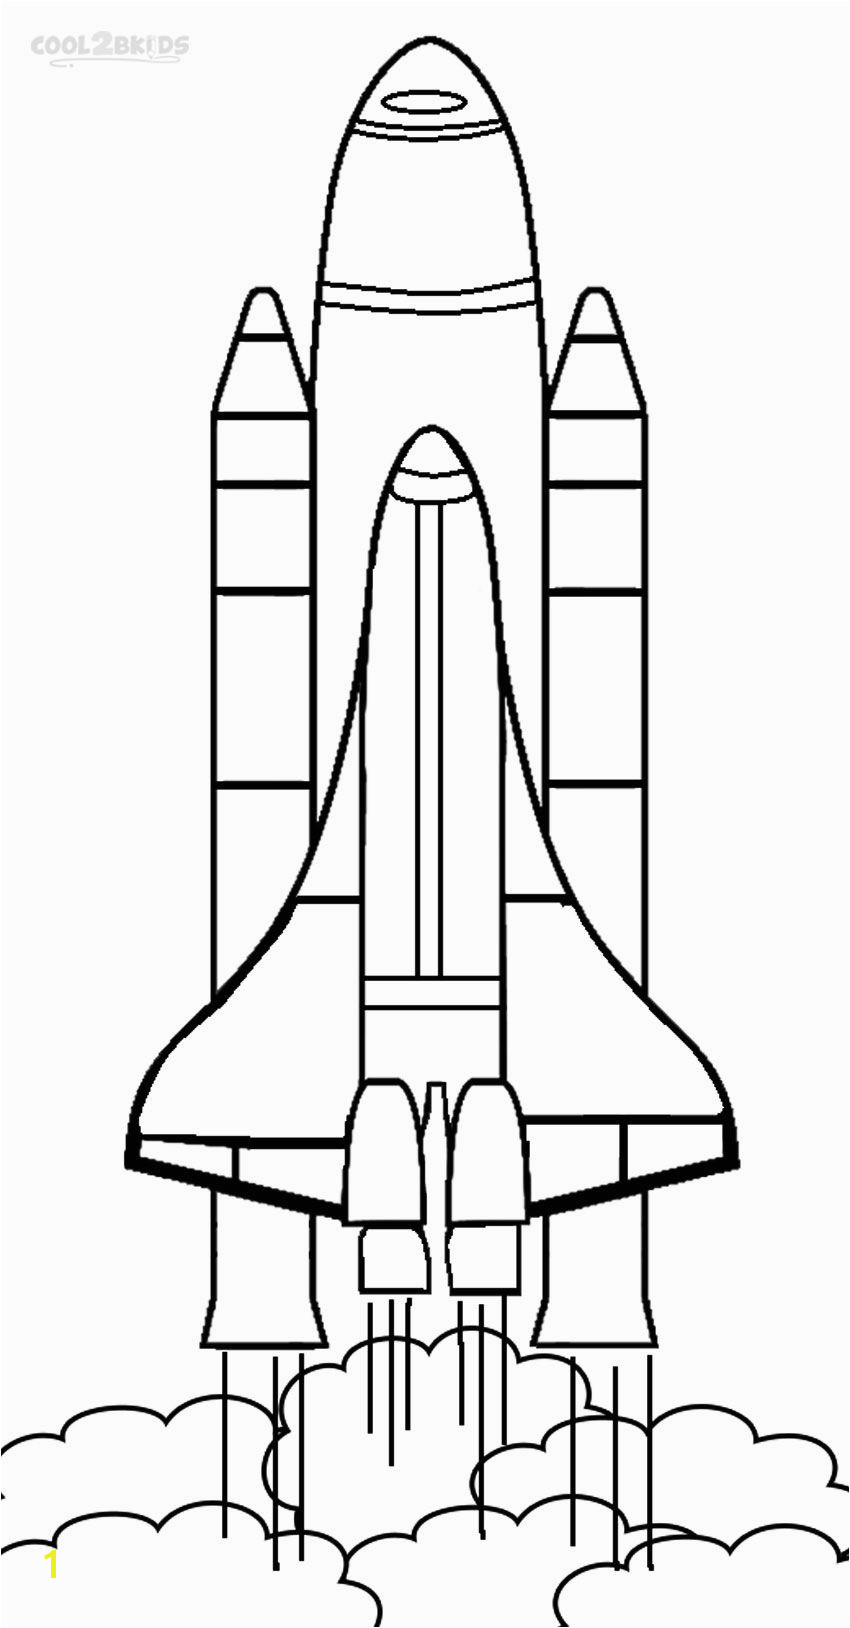 Mickey Mouse Rocket Ship Coloring Pages Printable Rocket Ship Coloring Pages for Kids Cool2bkids